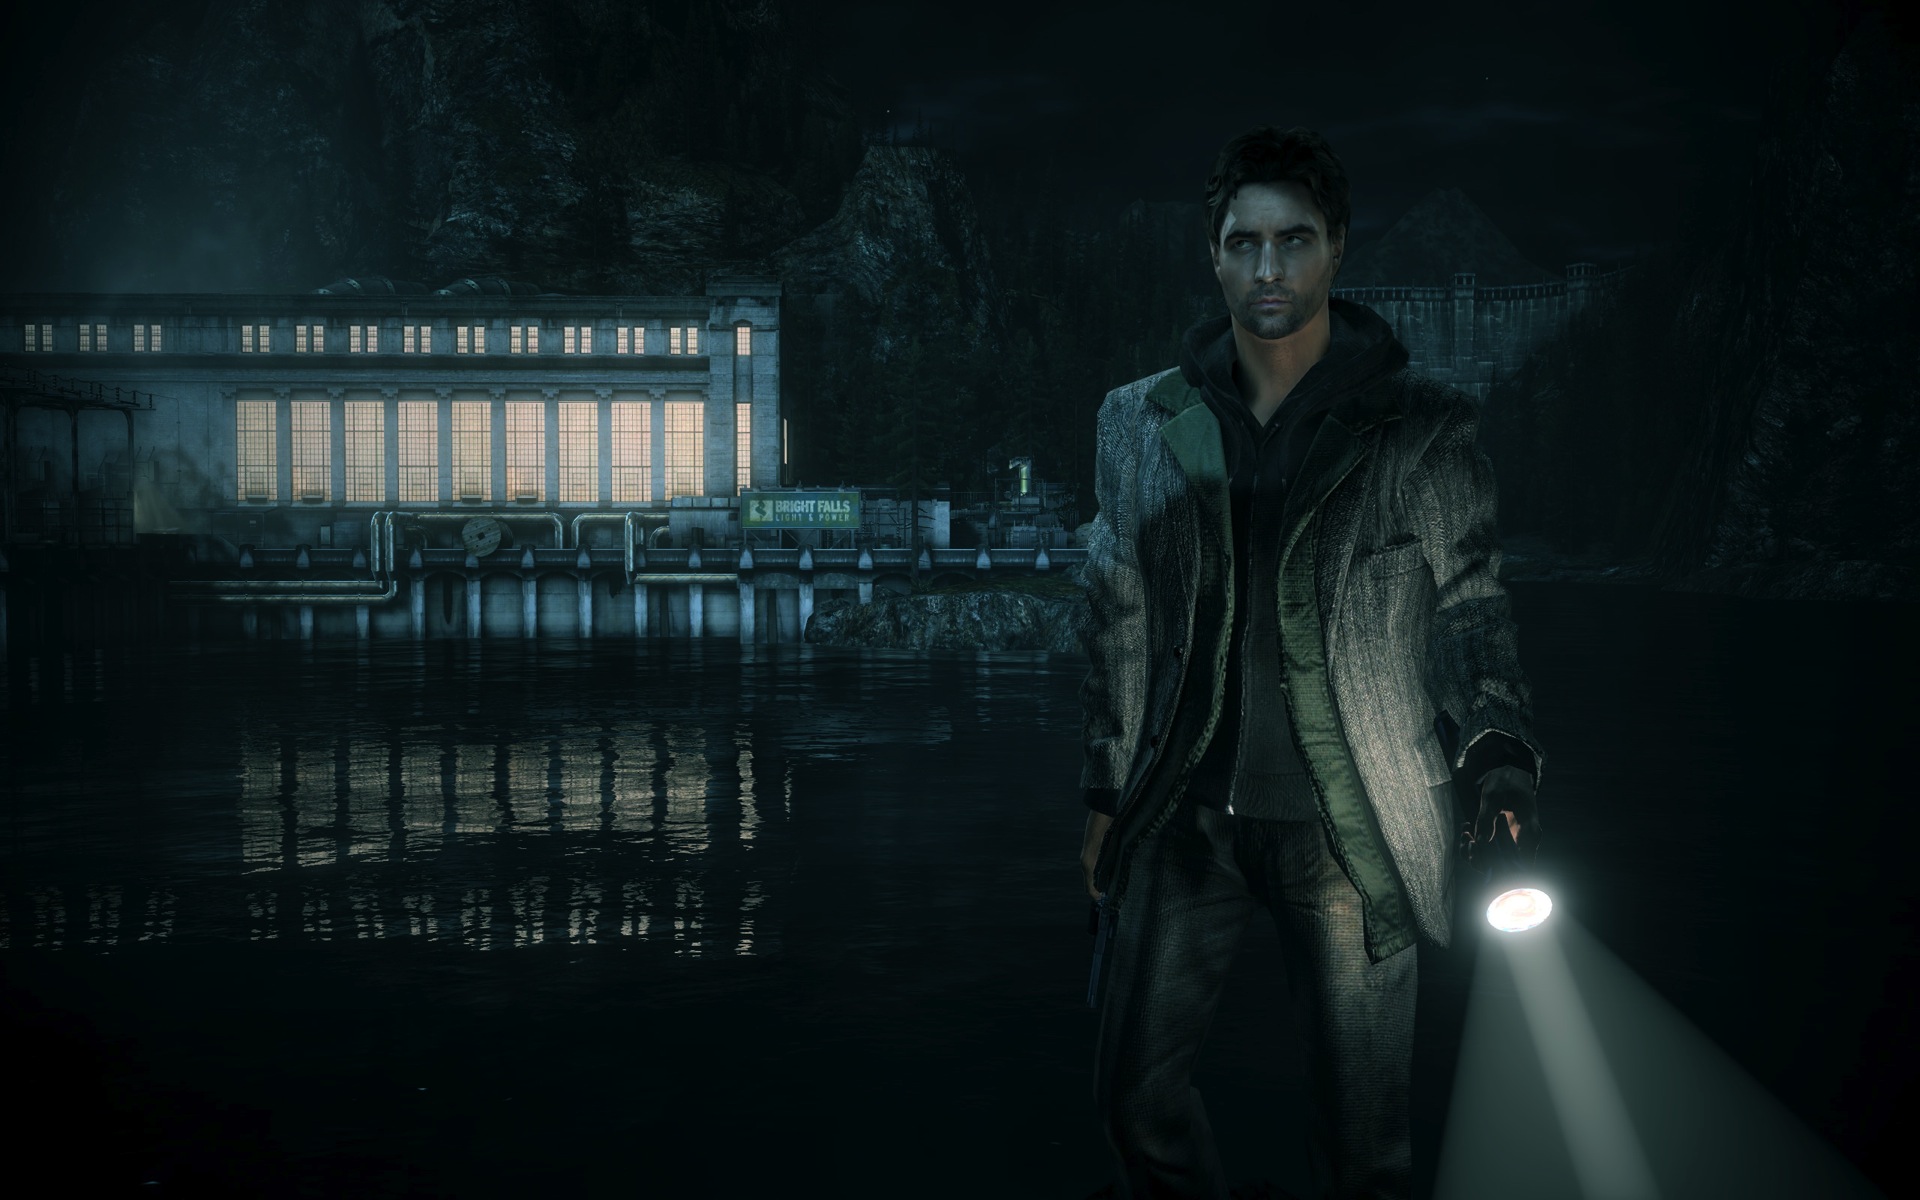 instal the last version for ios Alan Wake